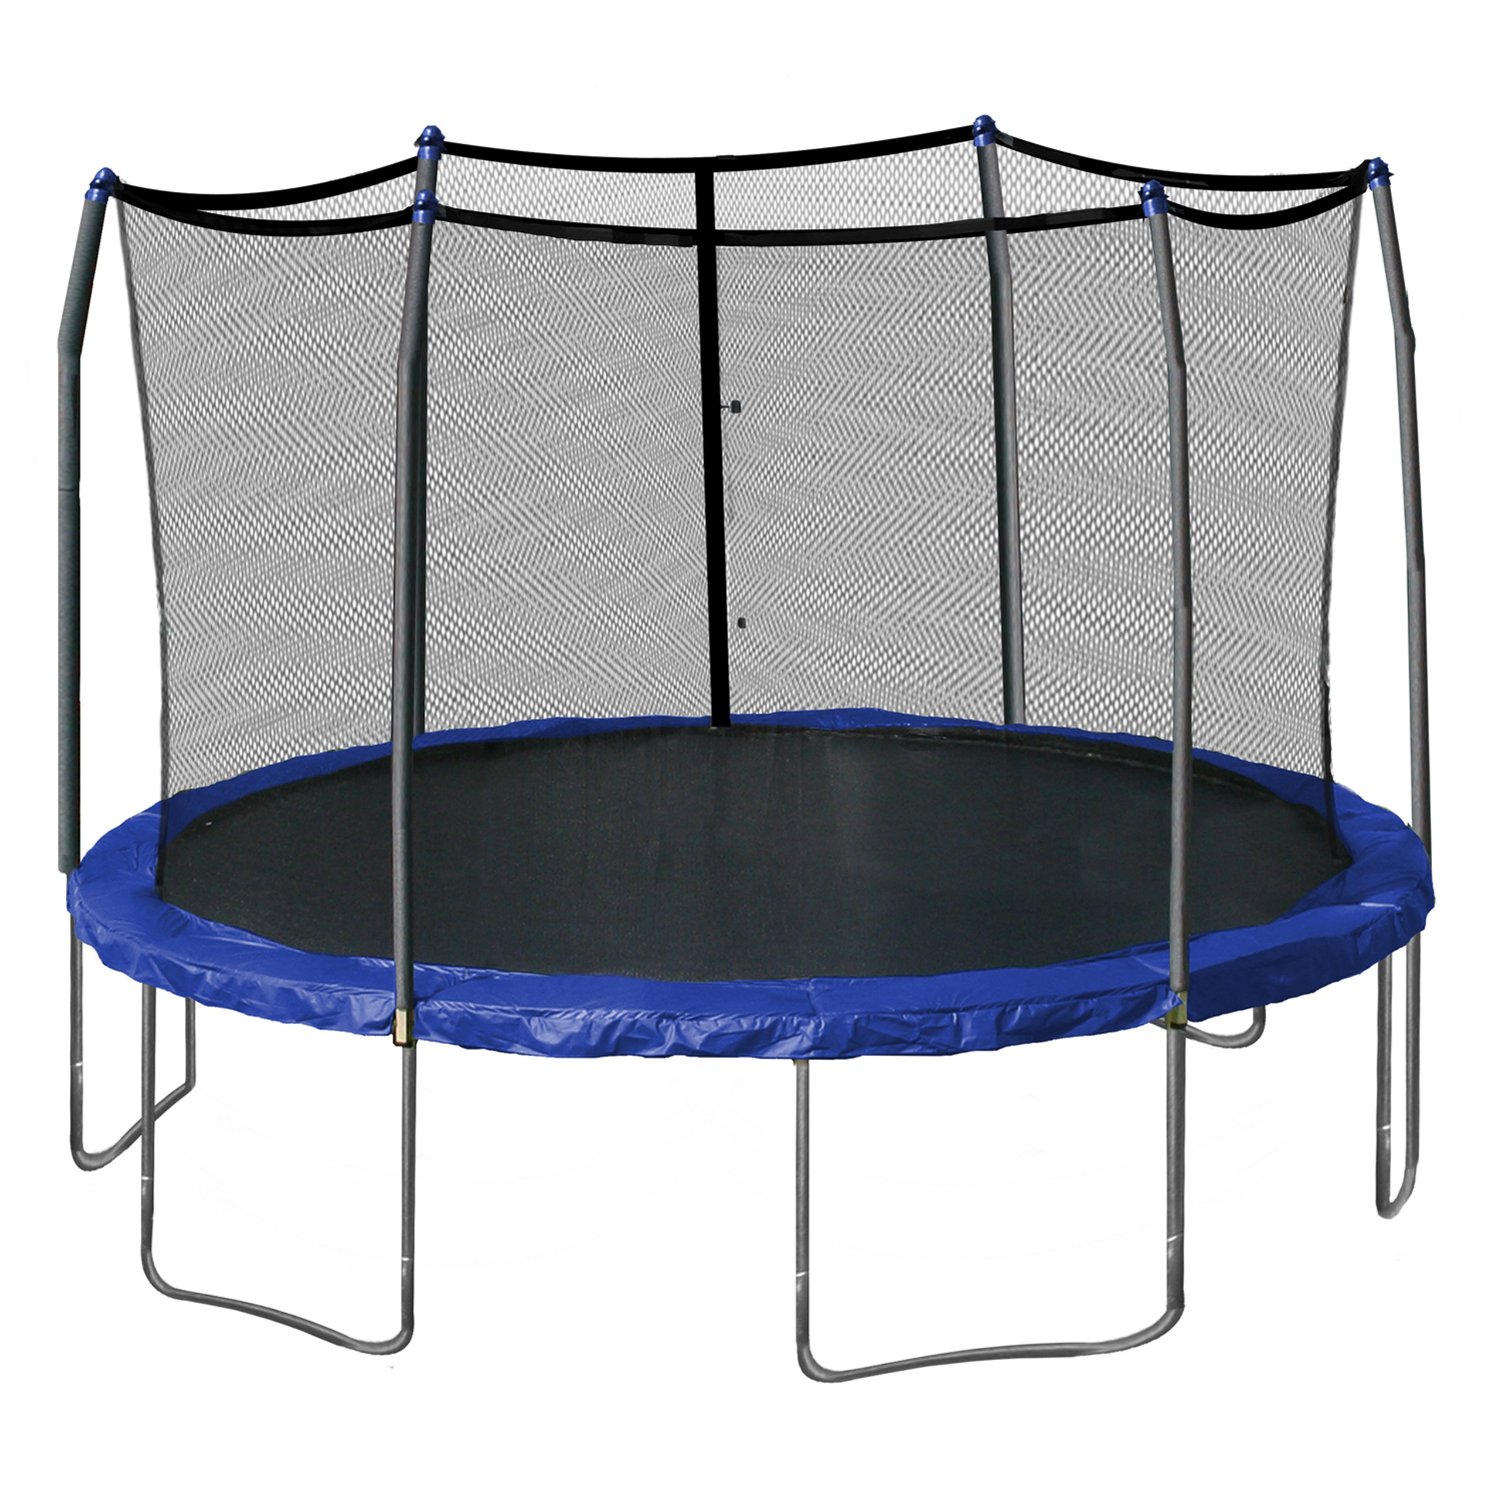 Skywalker Trampolines 15-Feet Round Trampoline and Enclosure with Spring Pad